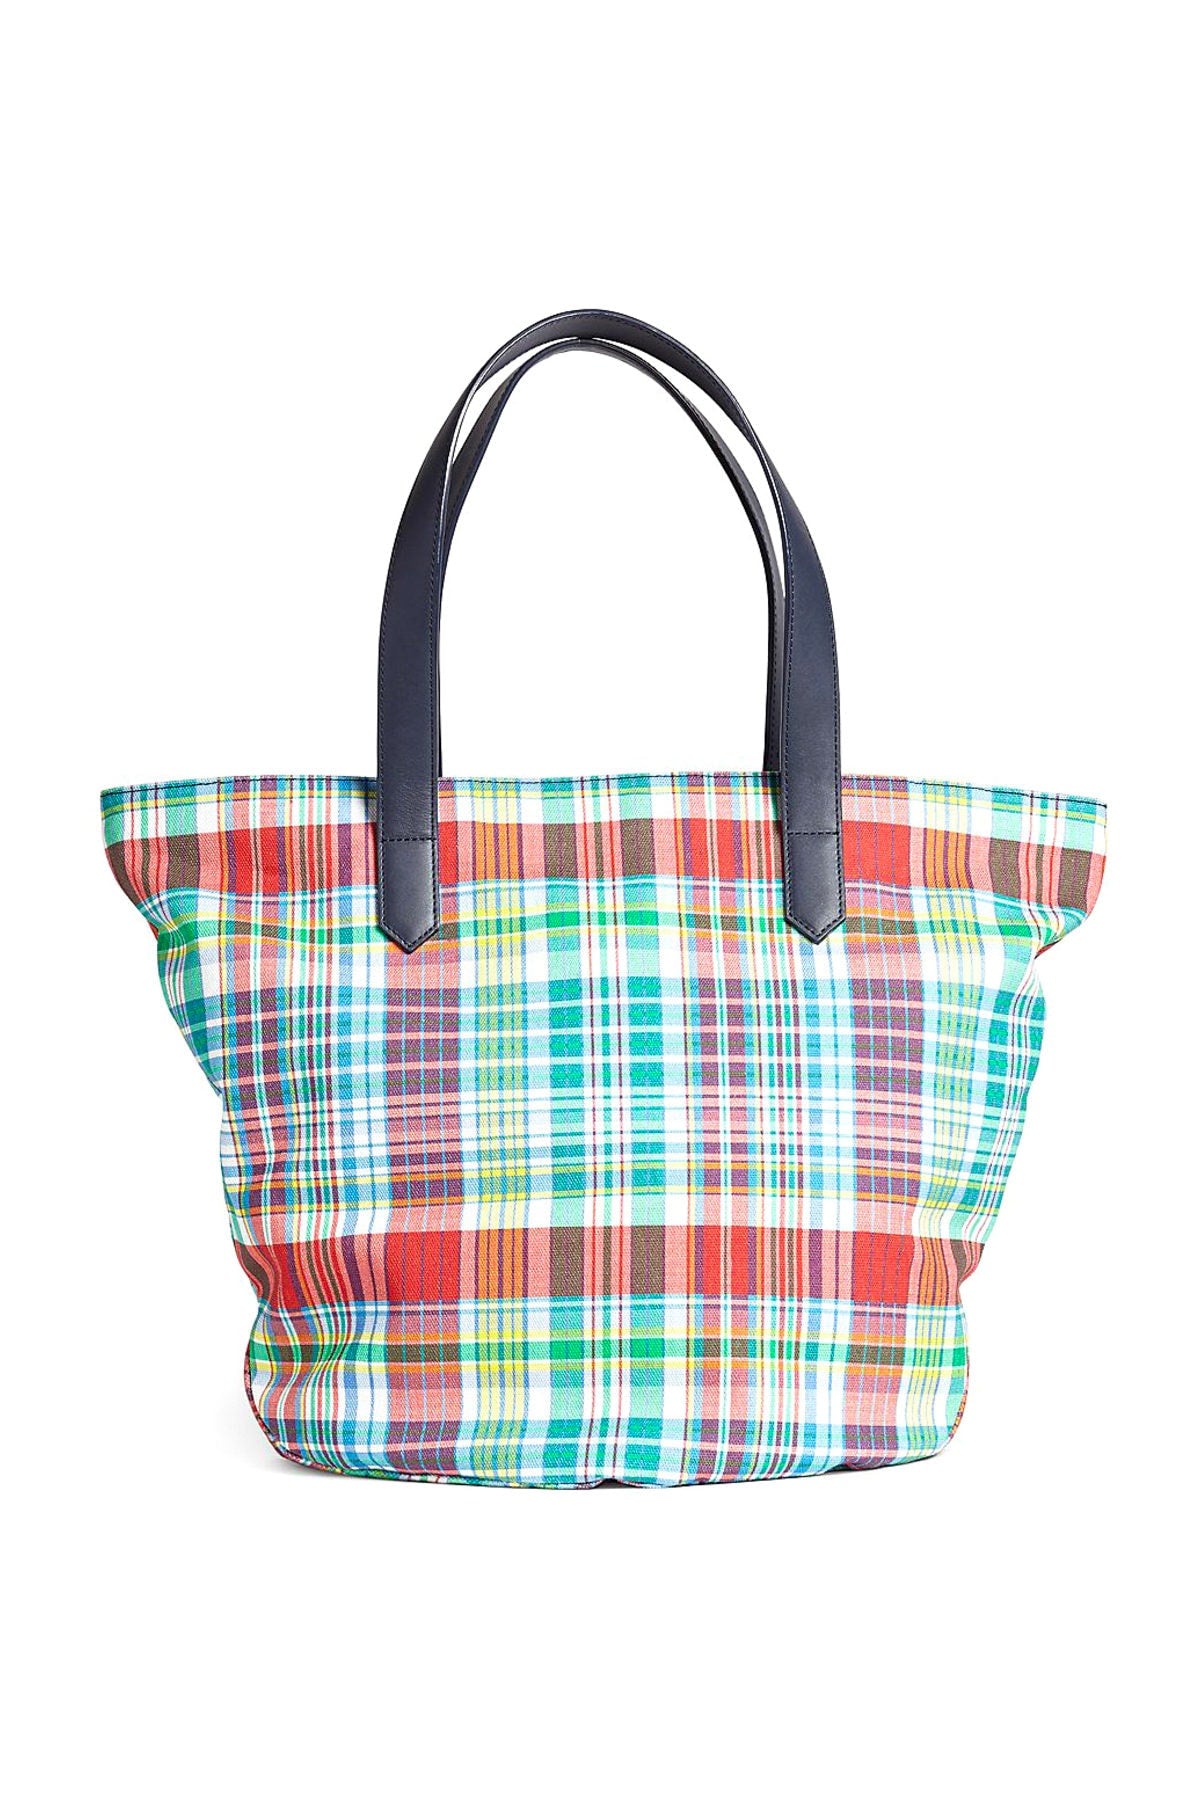 Green and red madras tote bag for women